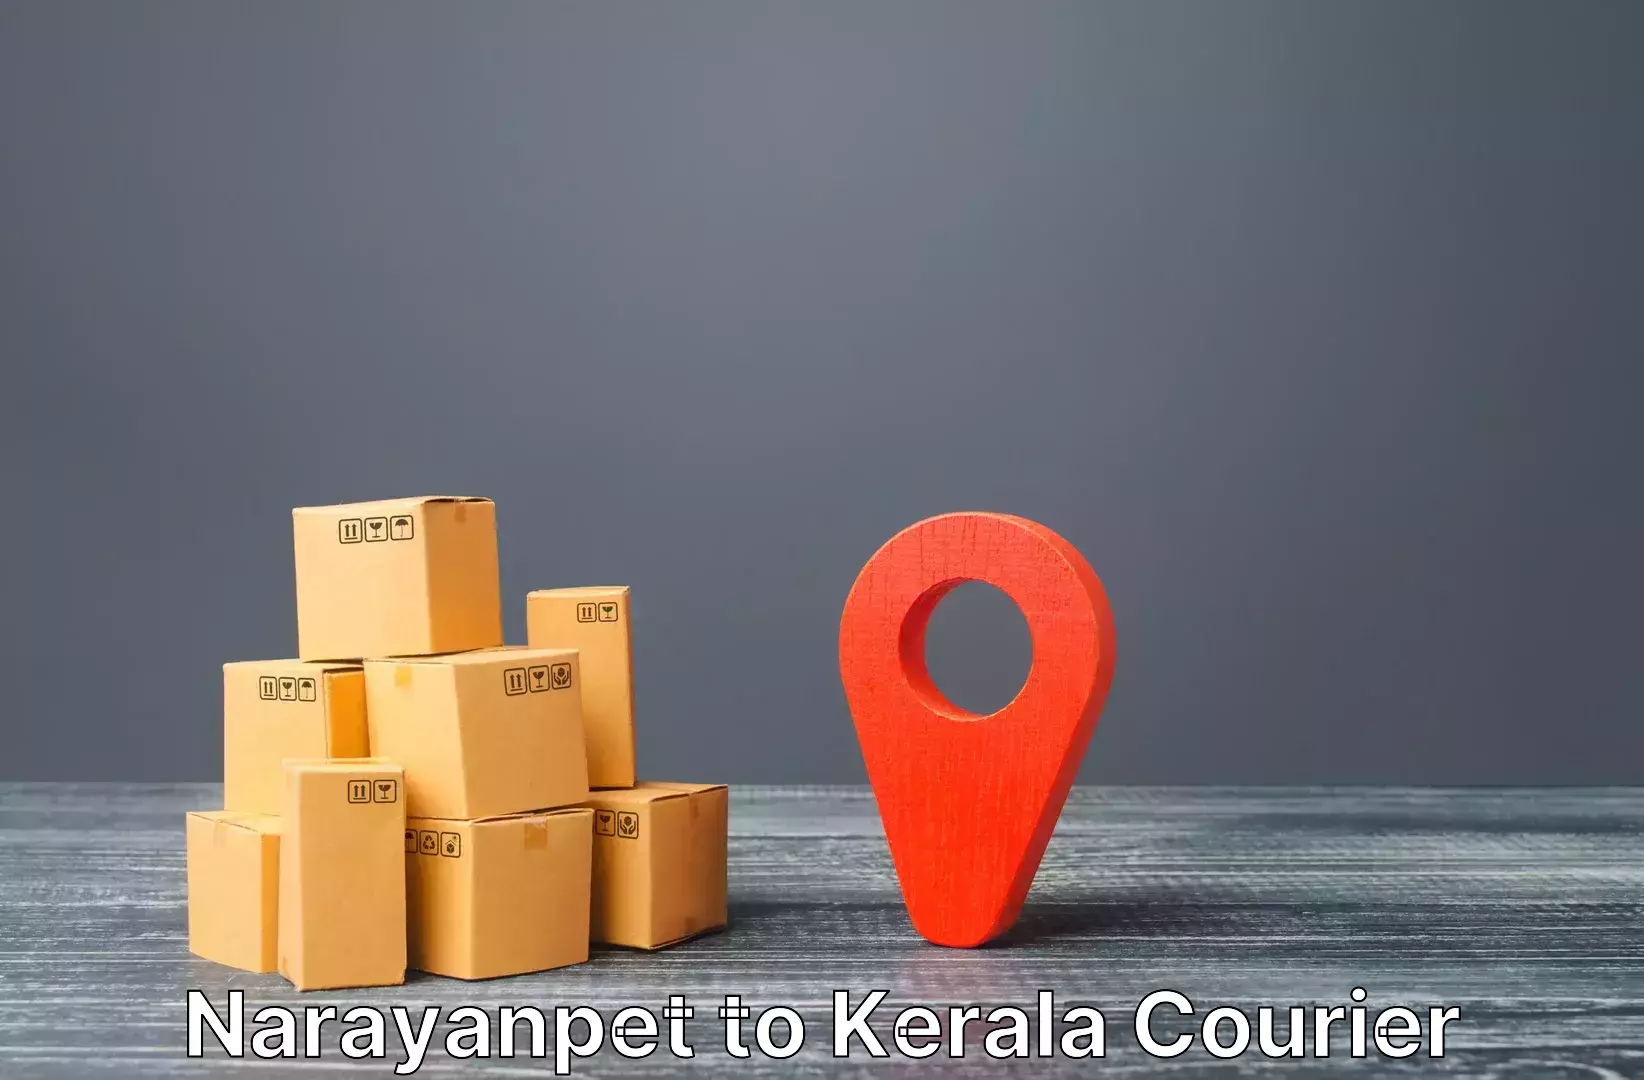 Baggage transport network Narayanpet to Angamaly